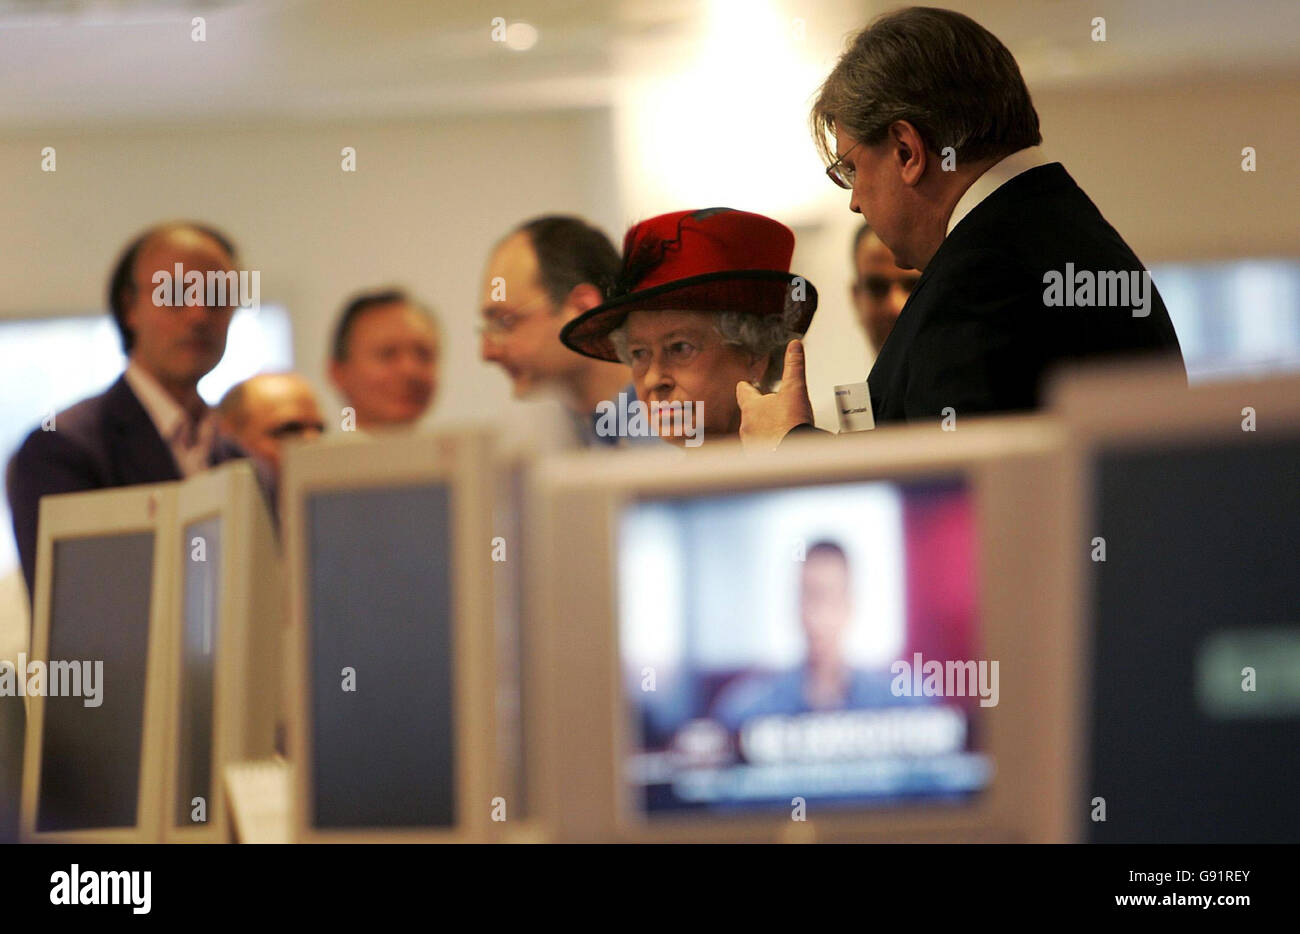 Britain's Queen Elizabeth is shown around the newsroom by Reuters Editor-in-Chief Geert Linnebank (R) during a visit to the new Reuters building at Canary Wharf in London, December 13, 2005. Her Majesty conversed fluently in French as she toured the company's global headquarters - and even launched a story about her visit onto the agency's news wire. See PA story ROYAL Reuters. PRESS ASSOCIATION Photo. Photo credit should read: Toby Melville/Reuters/WPA/PA . Stock Photo